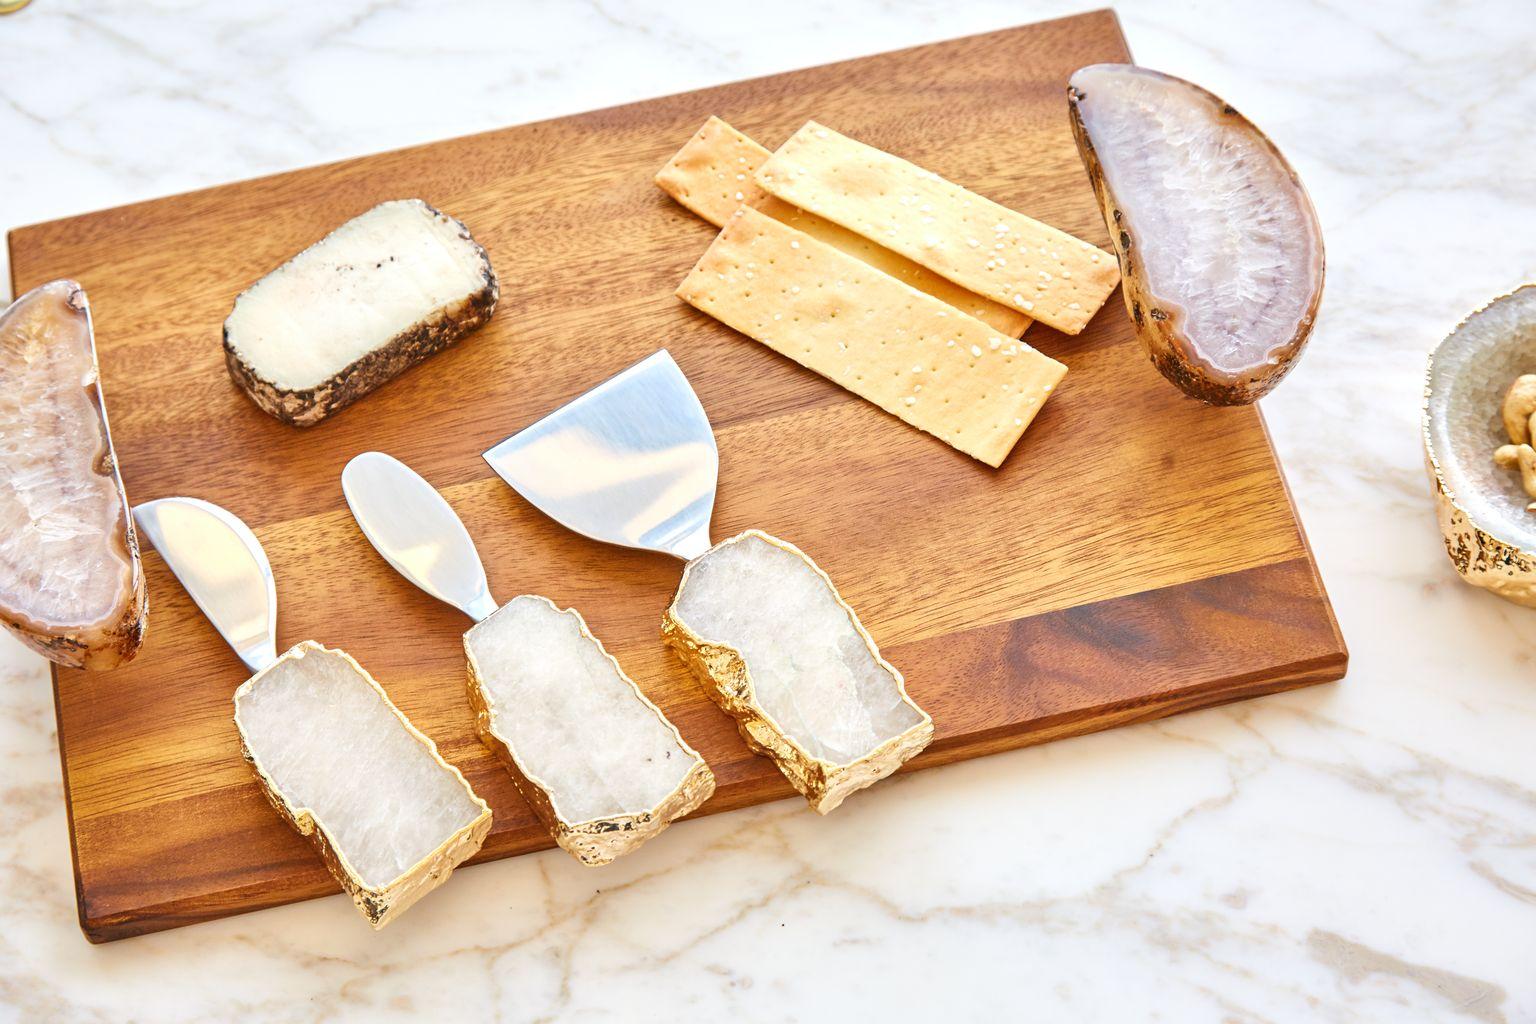 This unique set of three cheese knives and spreaders features polished, semi-precious gemstones, and electroplated 24k gold. This set is the perfect wedding or hostess gift. Functional, yet completely unusual--an instant heirloom. This set is